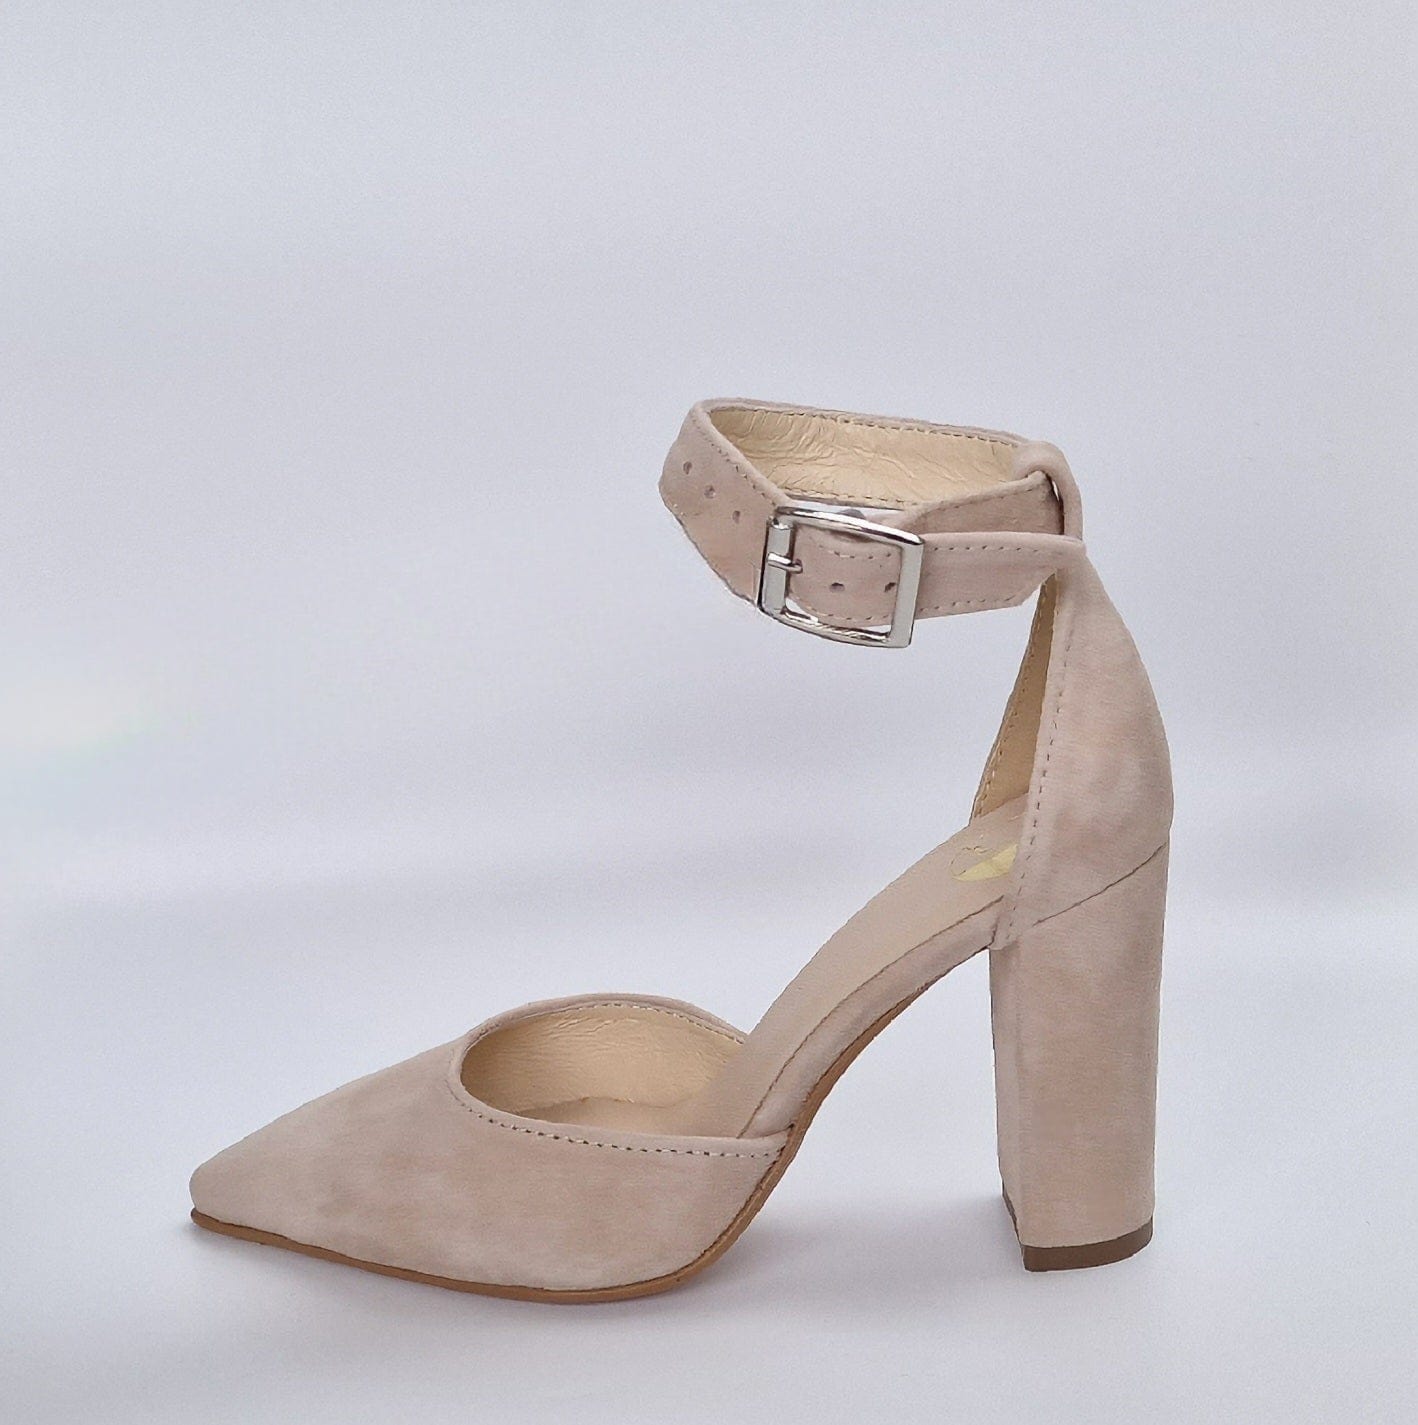 Nude suede ankle strap court heels